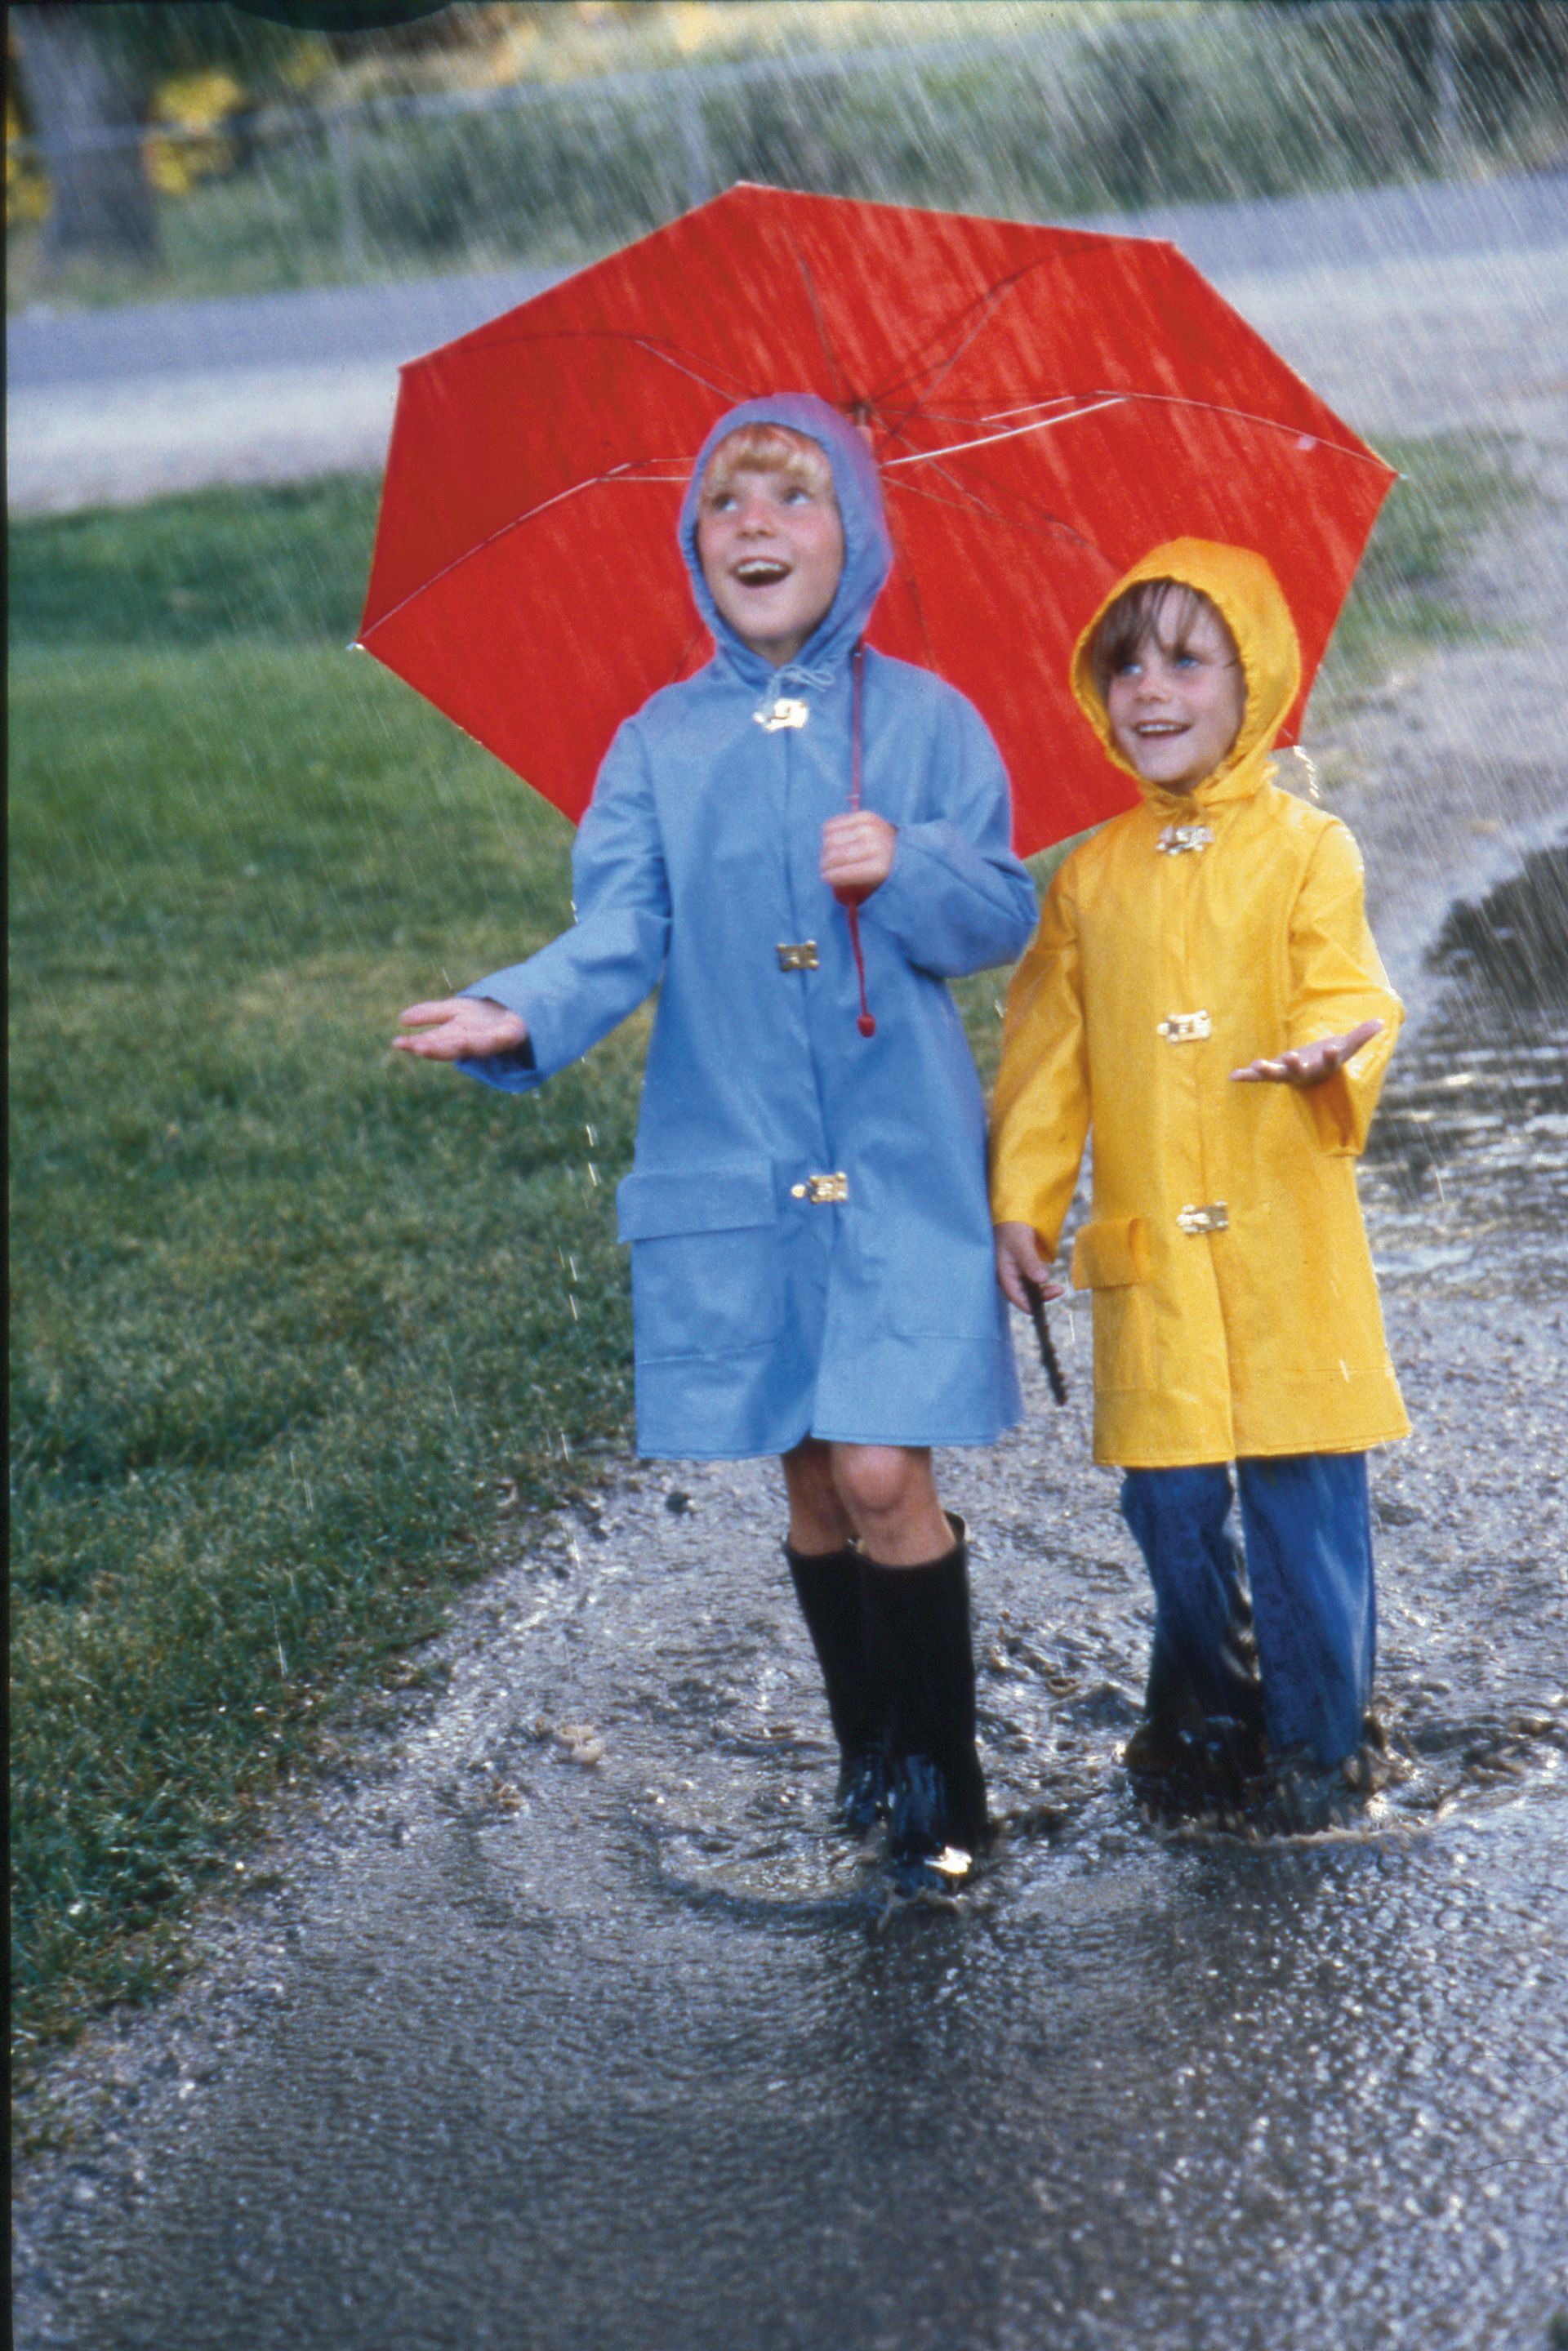 Two girls in raincoats and an umbrella play outside in the rain and puddles.